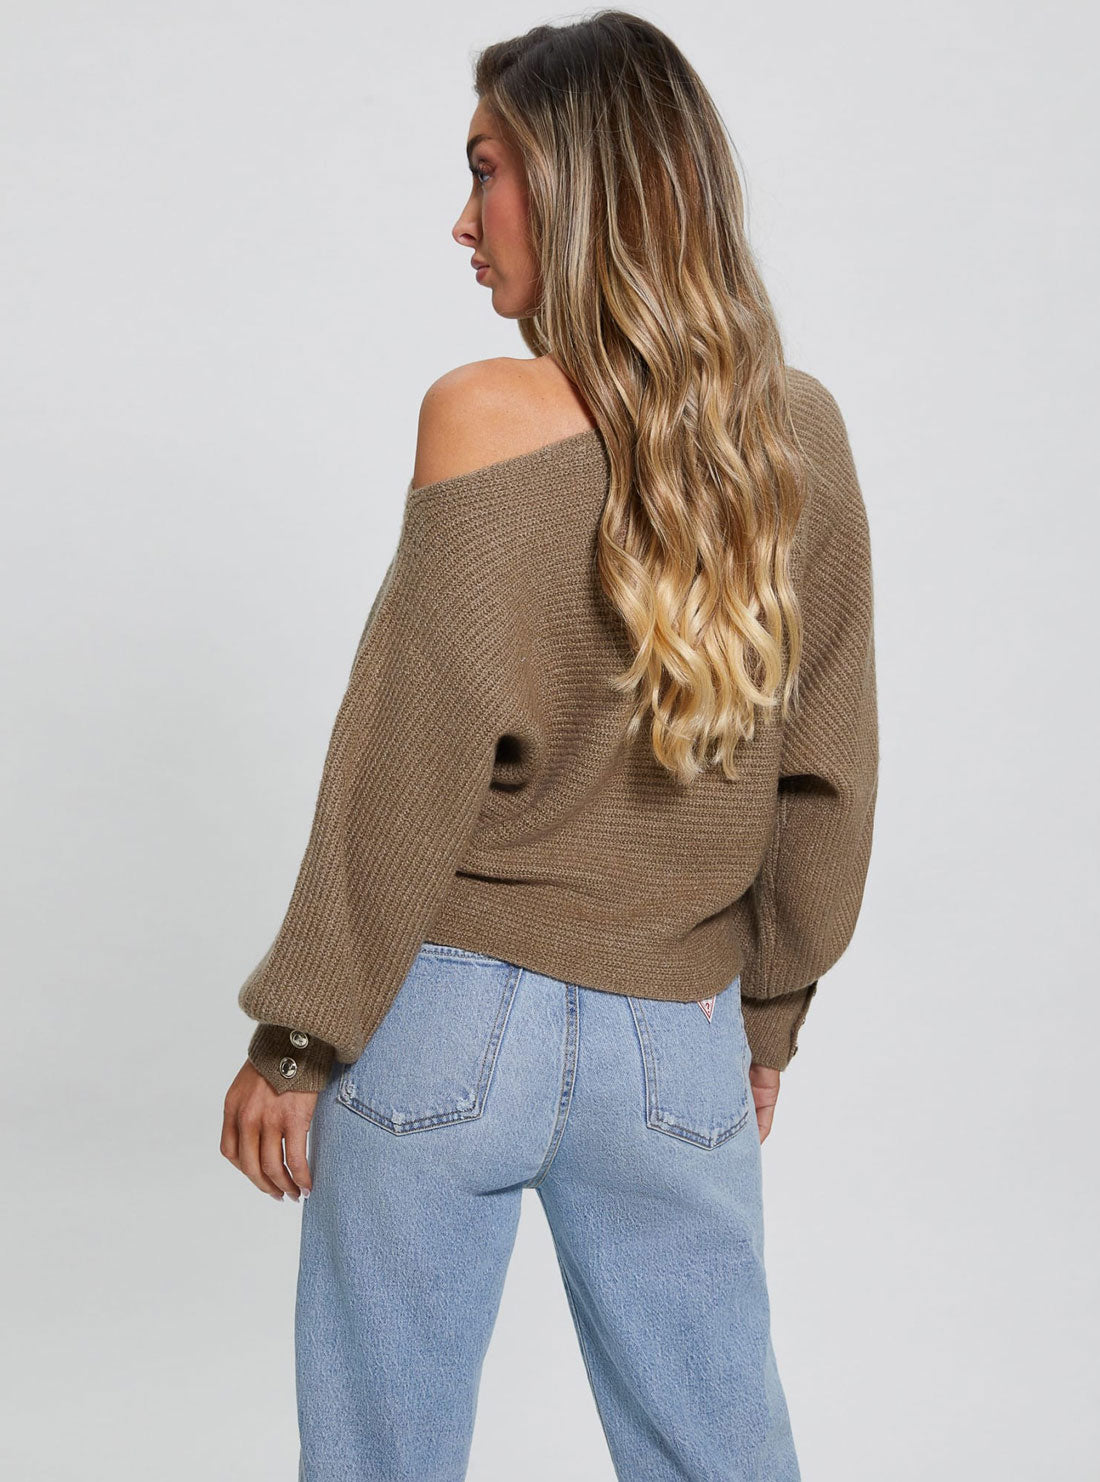 Brown Isadora Off-Shoulder Knit Top | GUESS Women's Apparel | back view